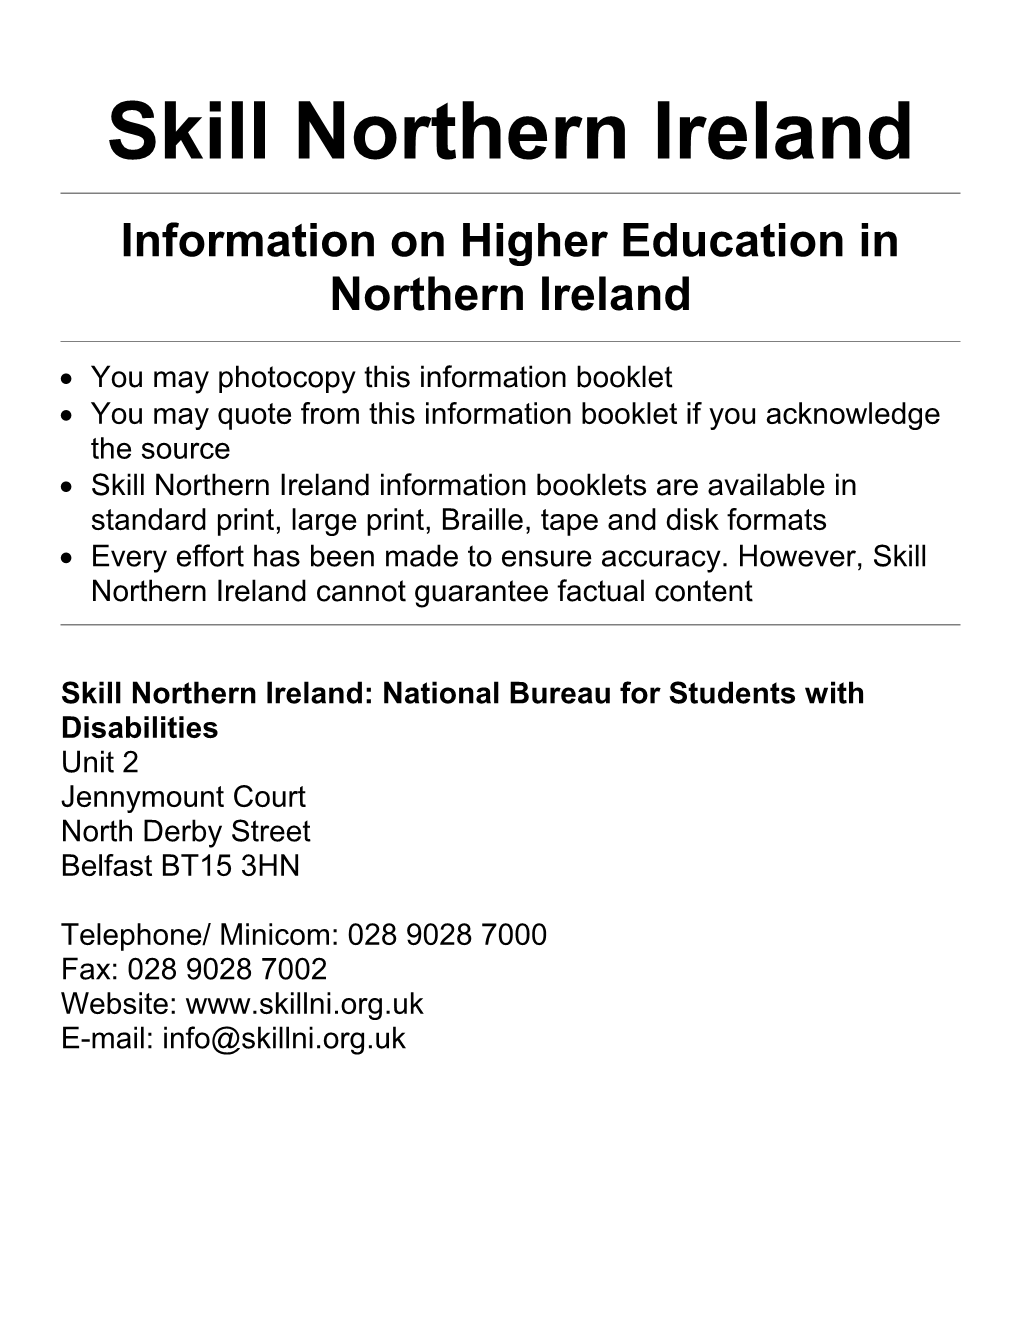 Information on Higher Education in Northern Ireland